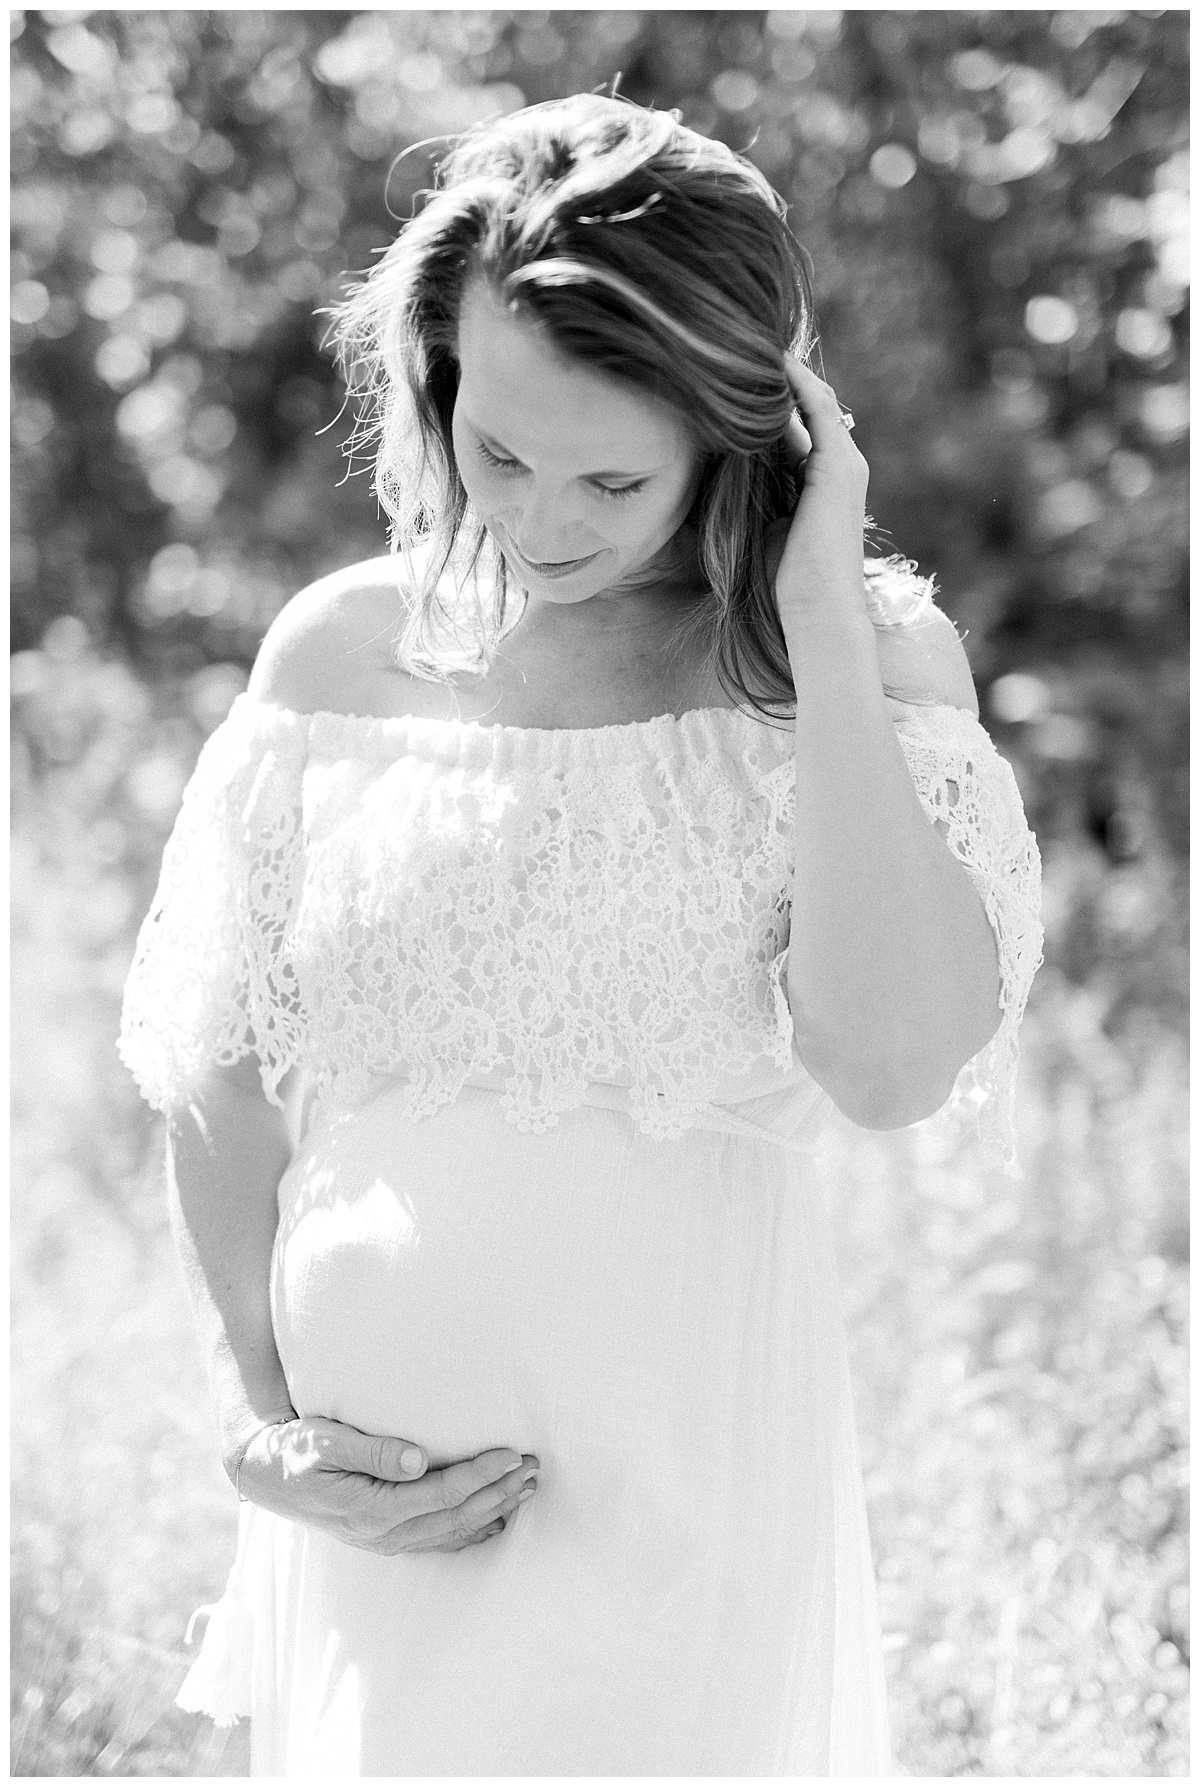 Black and White maternity photography in Murfreesboro, TN by photographer Grace Paul.